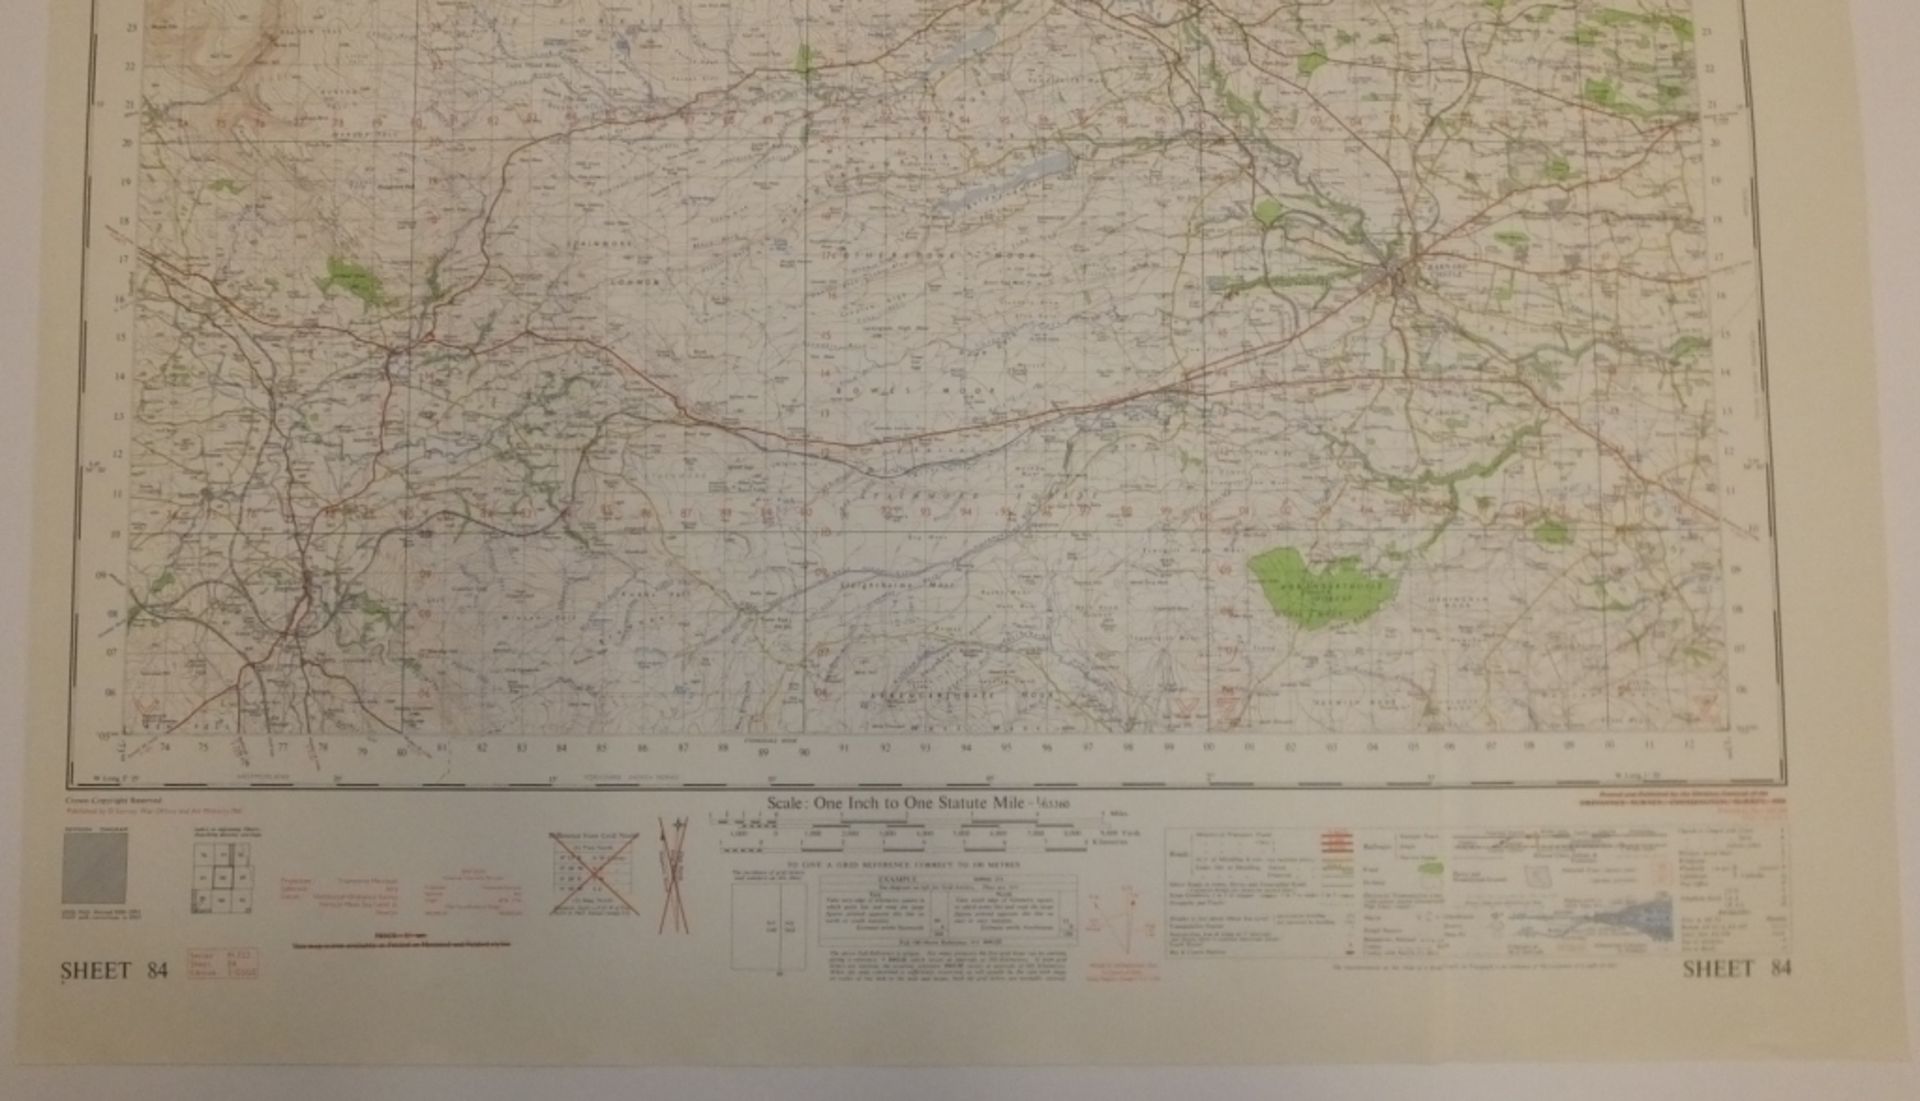 28x ENGLAND & WALES MAP TEESDALE 1INCH 1MILE 1961 7TH SERIES 3GSGS SHEET 84 - Image 3 of 4